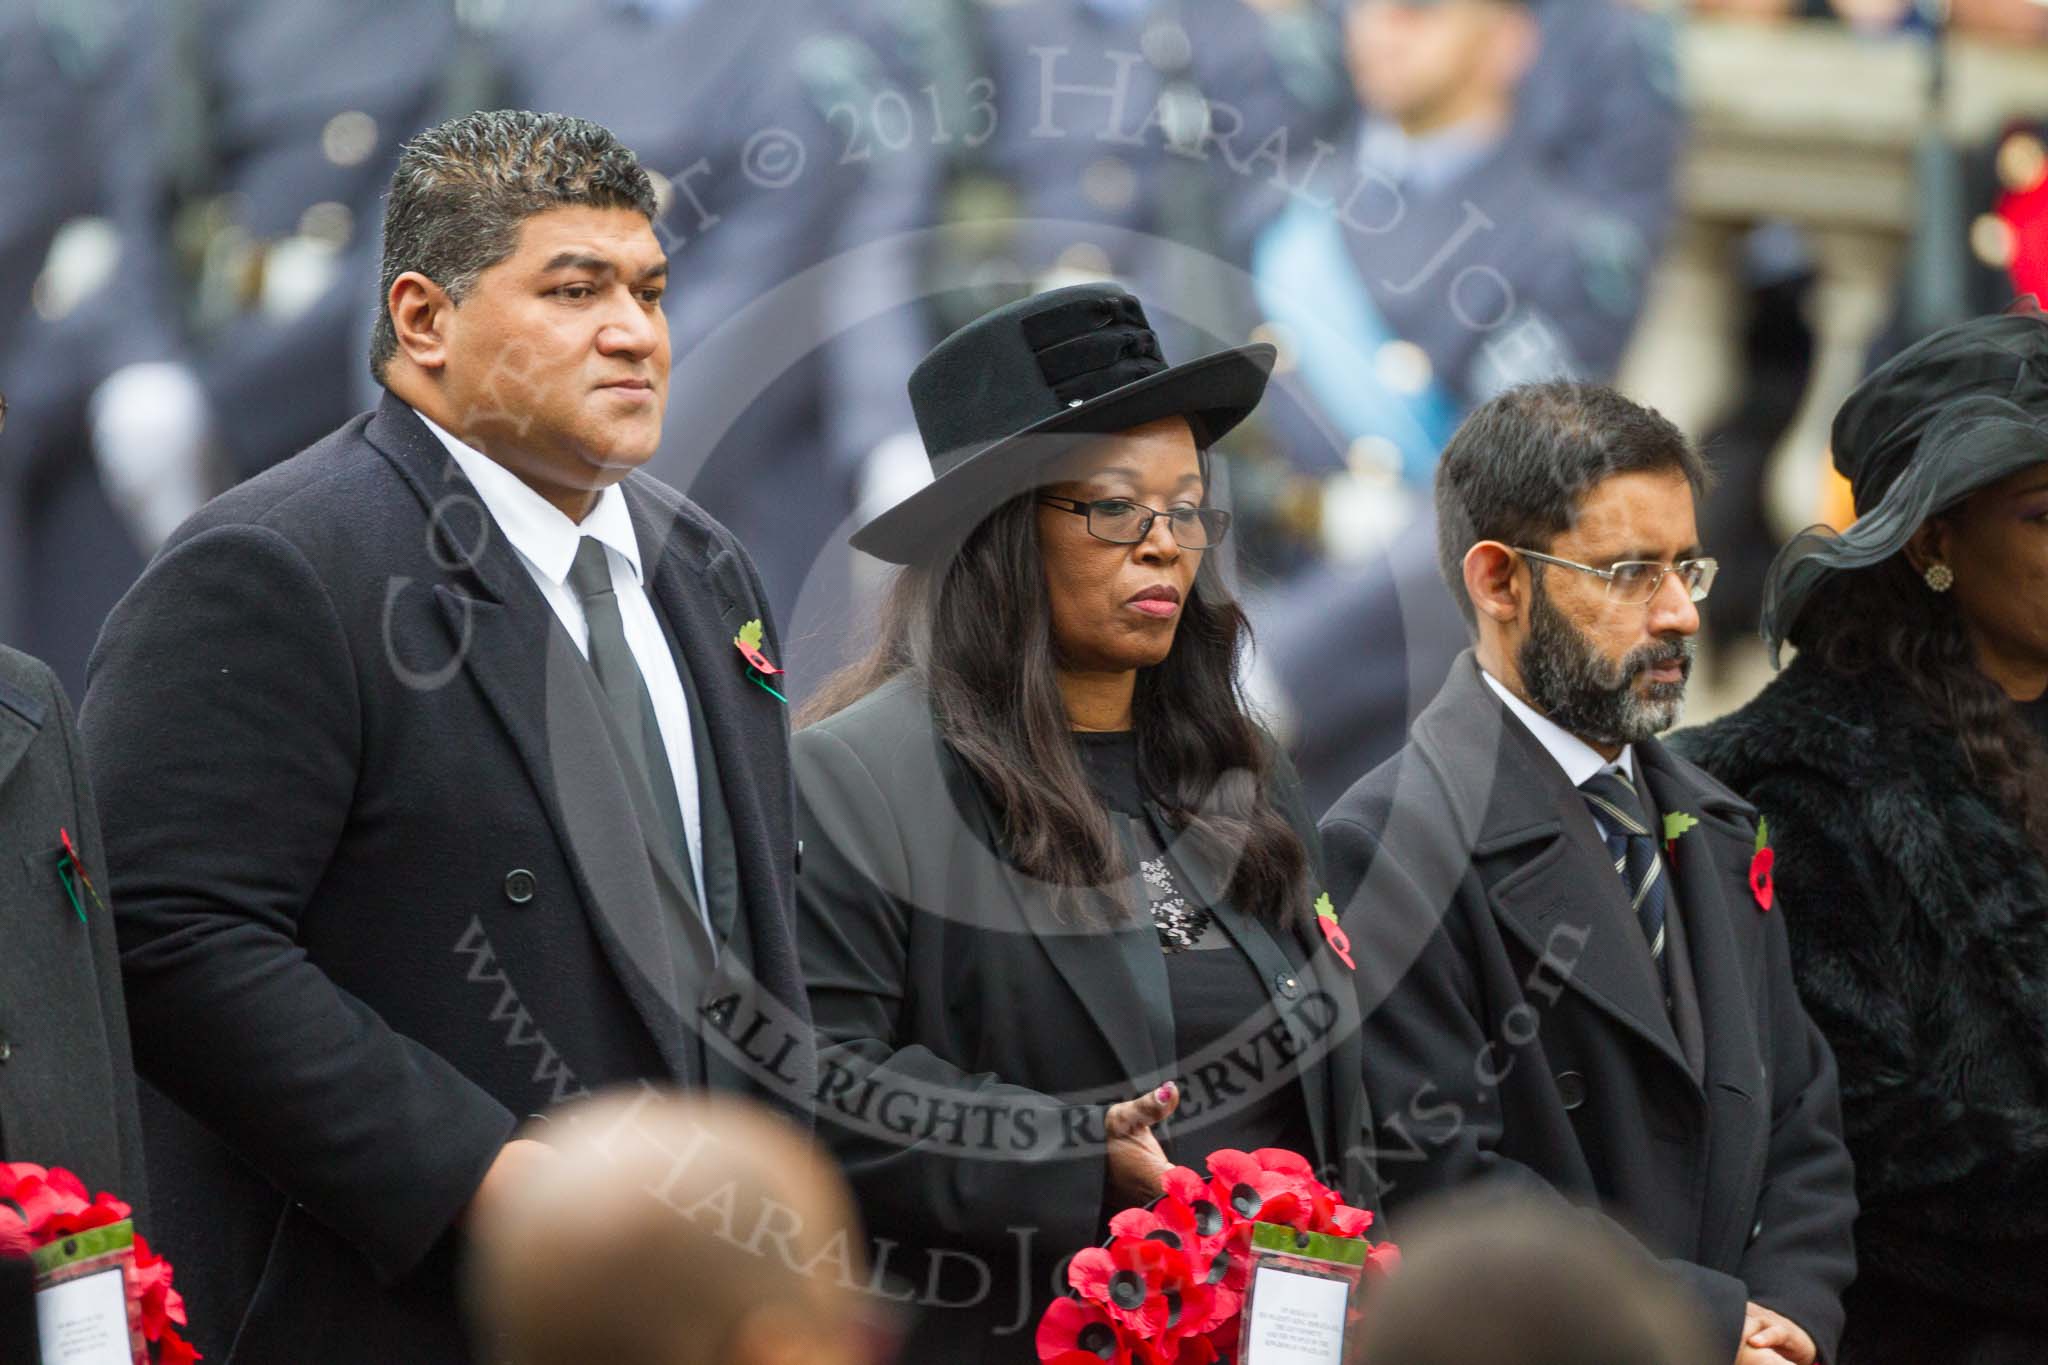 Remembrance Sunday at the Cenotaph 2015: The Acting High Commissioner of Tonga, the High Commissioner of Swaziland and the High Commissioner of Mauritius with their wreaths at the Cenotaph. Image #117, 08 November 2015 10:57 Whitehall, London, UK